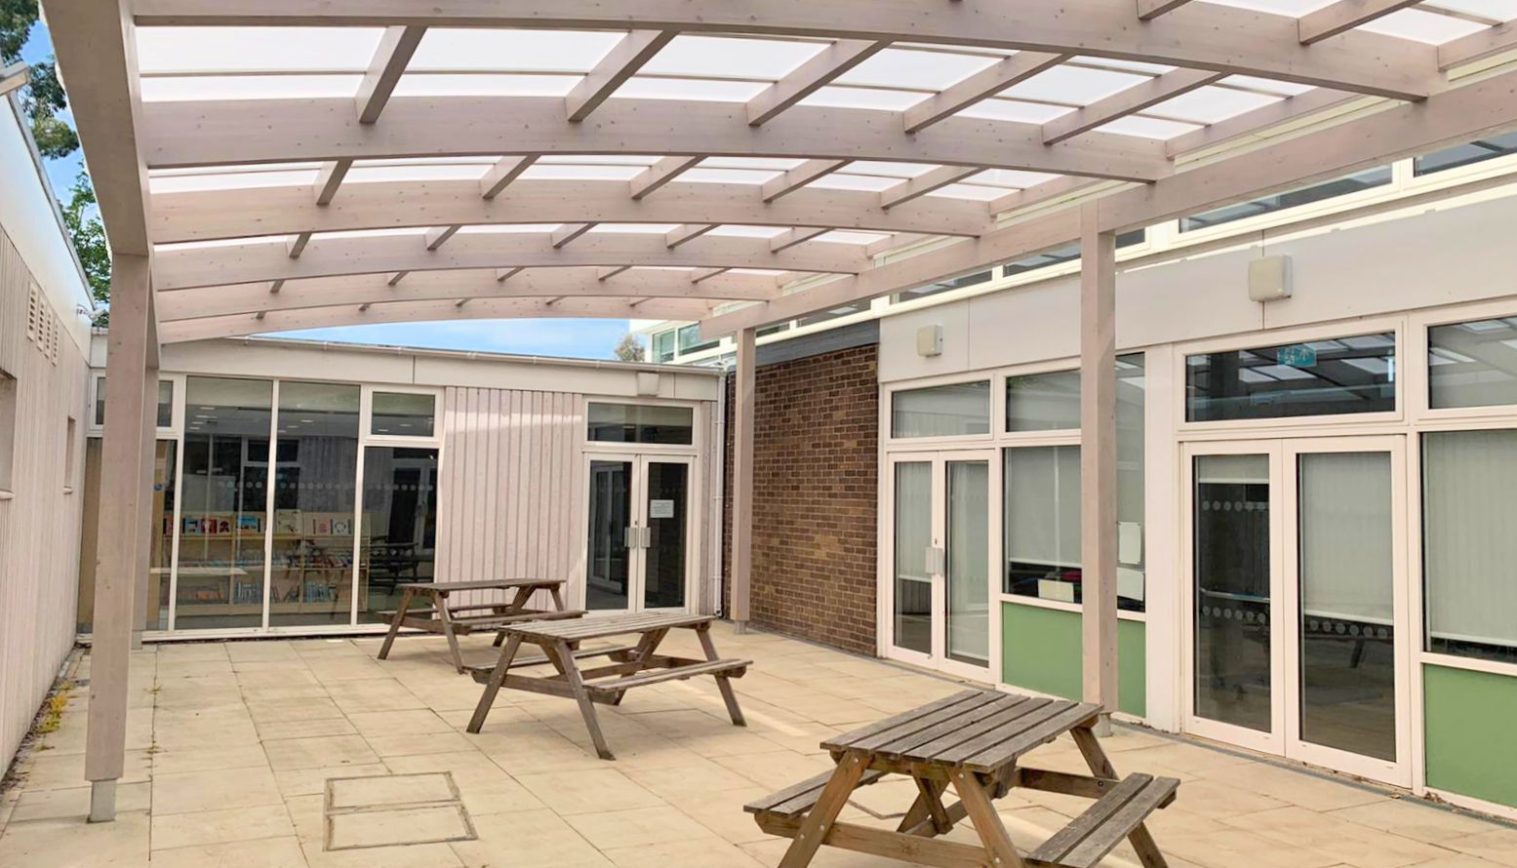 Maltese Road Primary School – Free Standing Timber Canopy